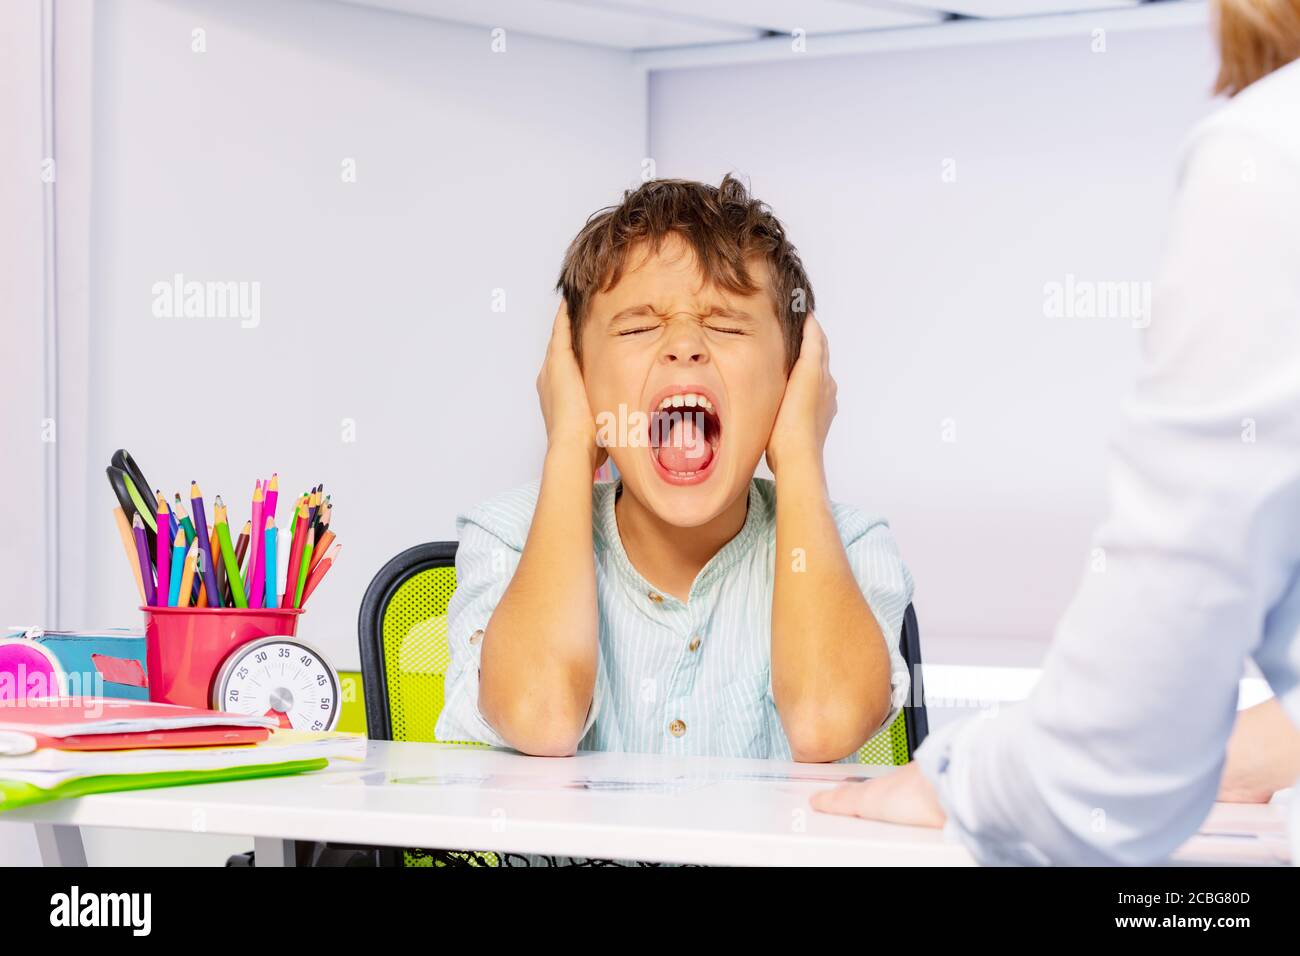 Boy with autism disorder scream and close ears in pain during ABA development therapy sitting by the table in class, sensory problem Stock Photo